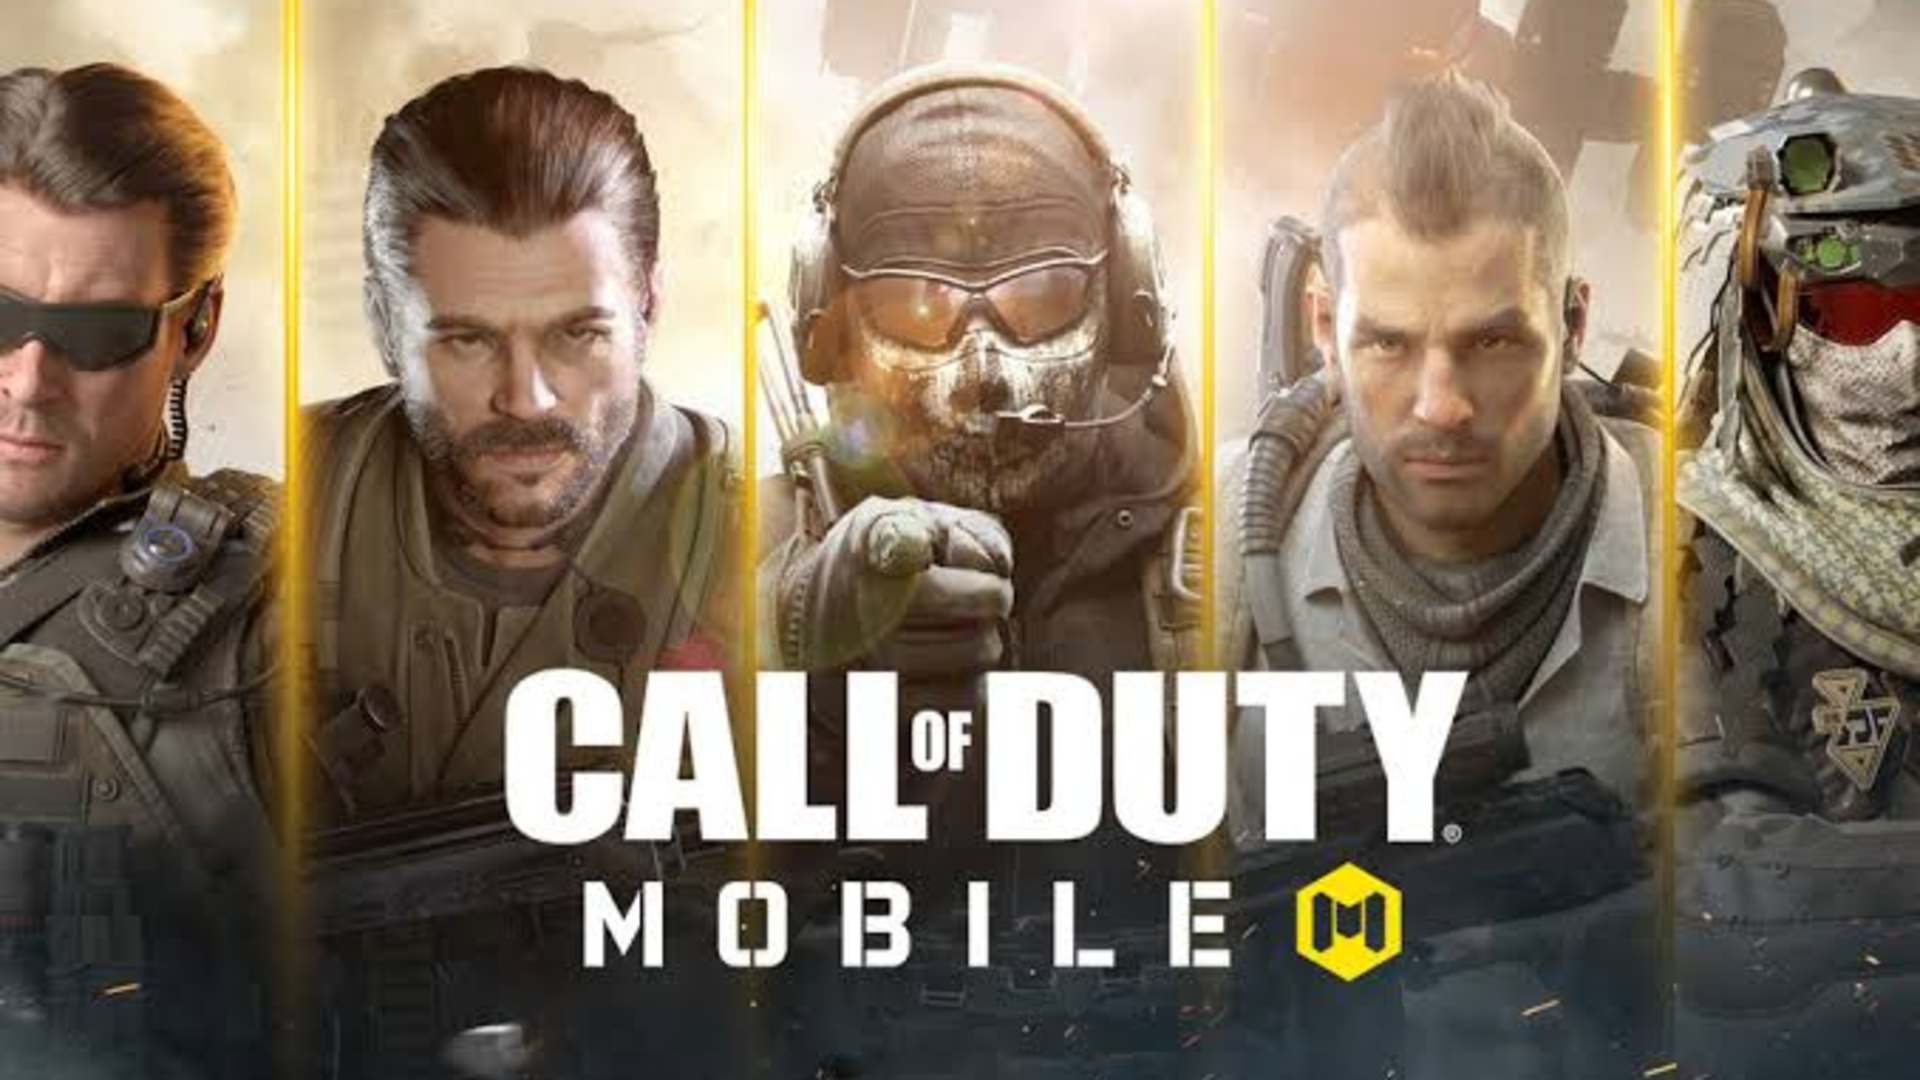 Call of Duty Mobile, Image credit: Facebook